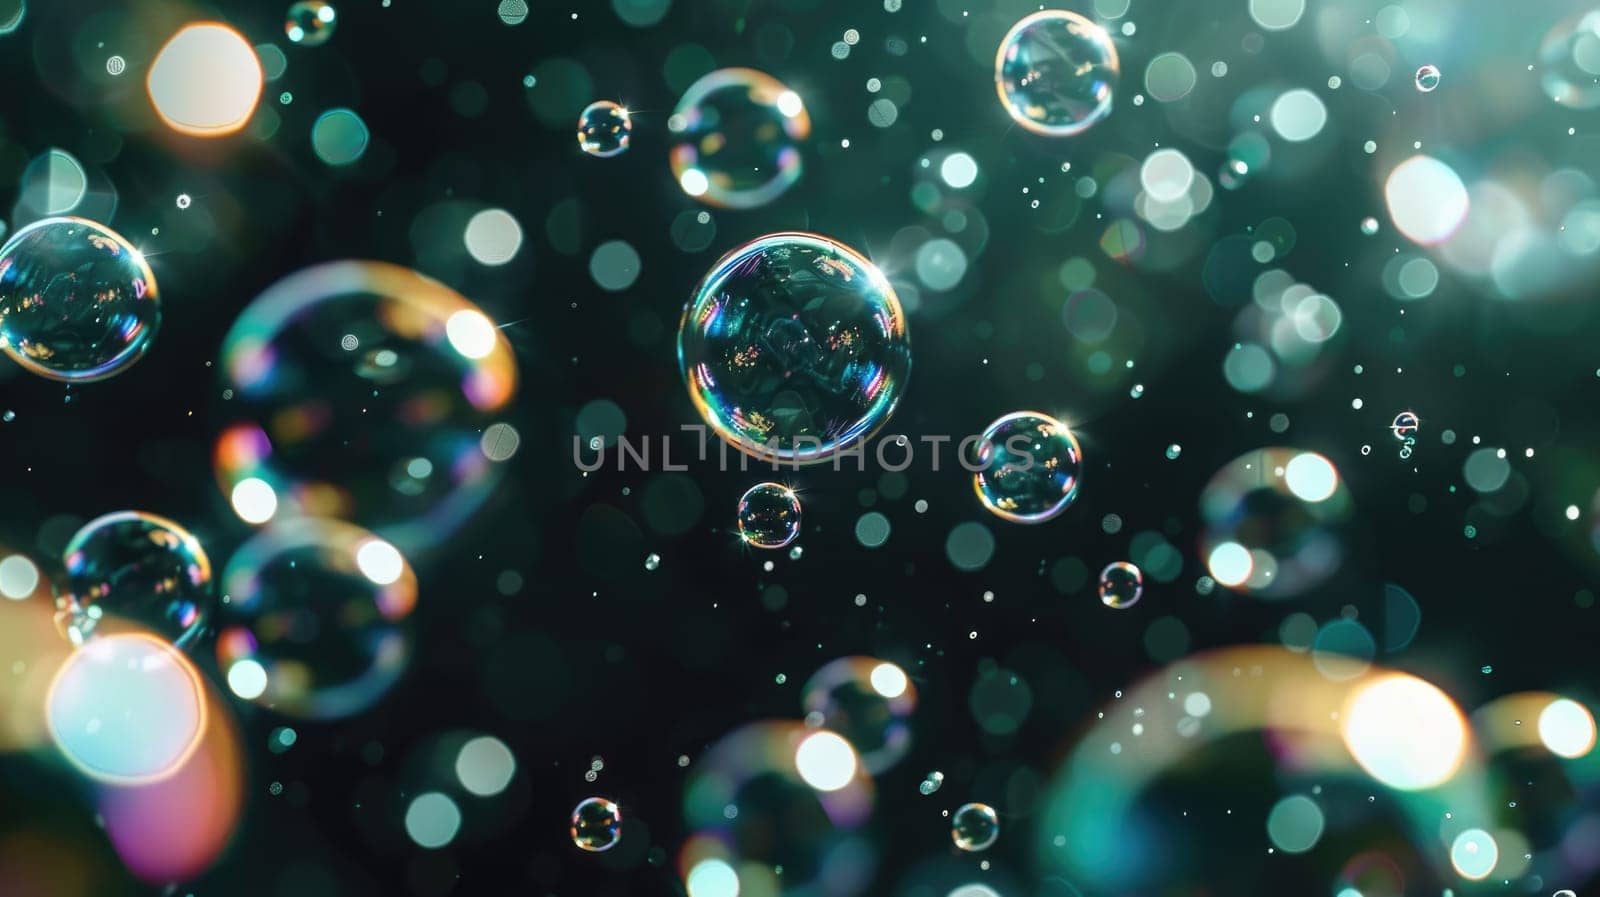 A colorful image of bubbles with a dark background.